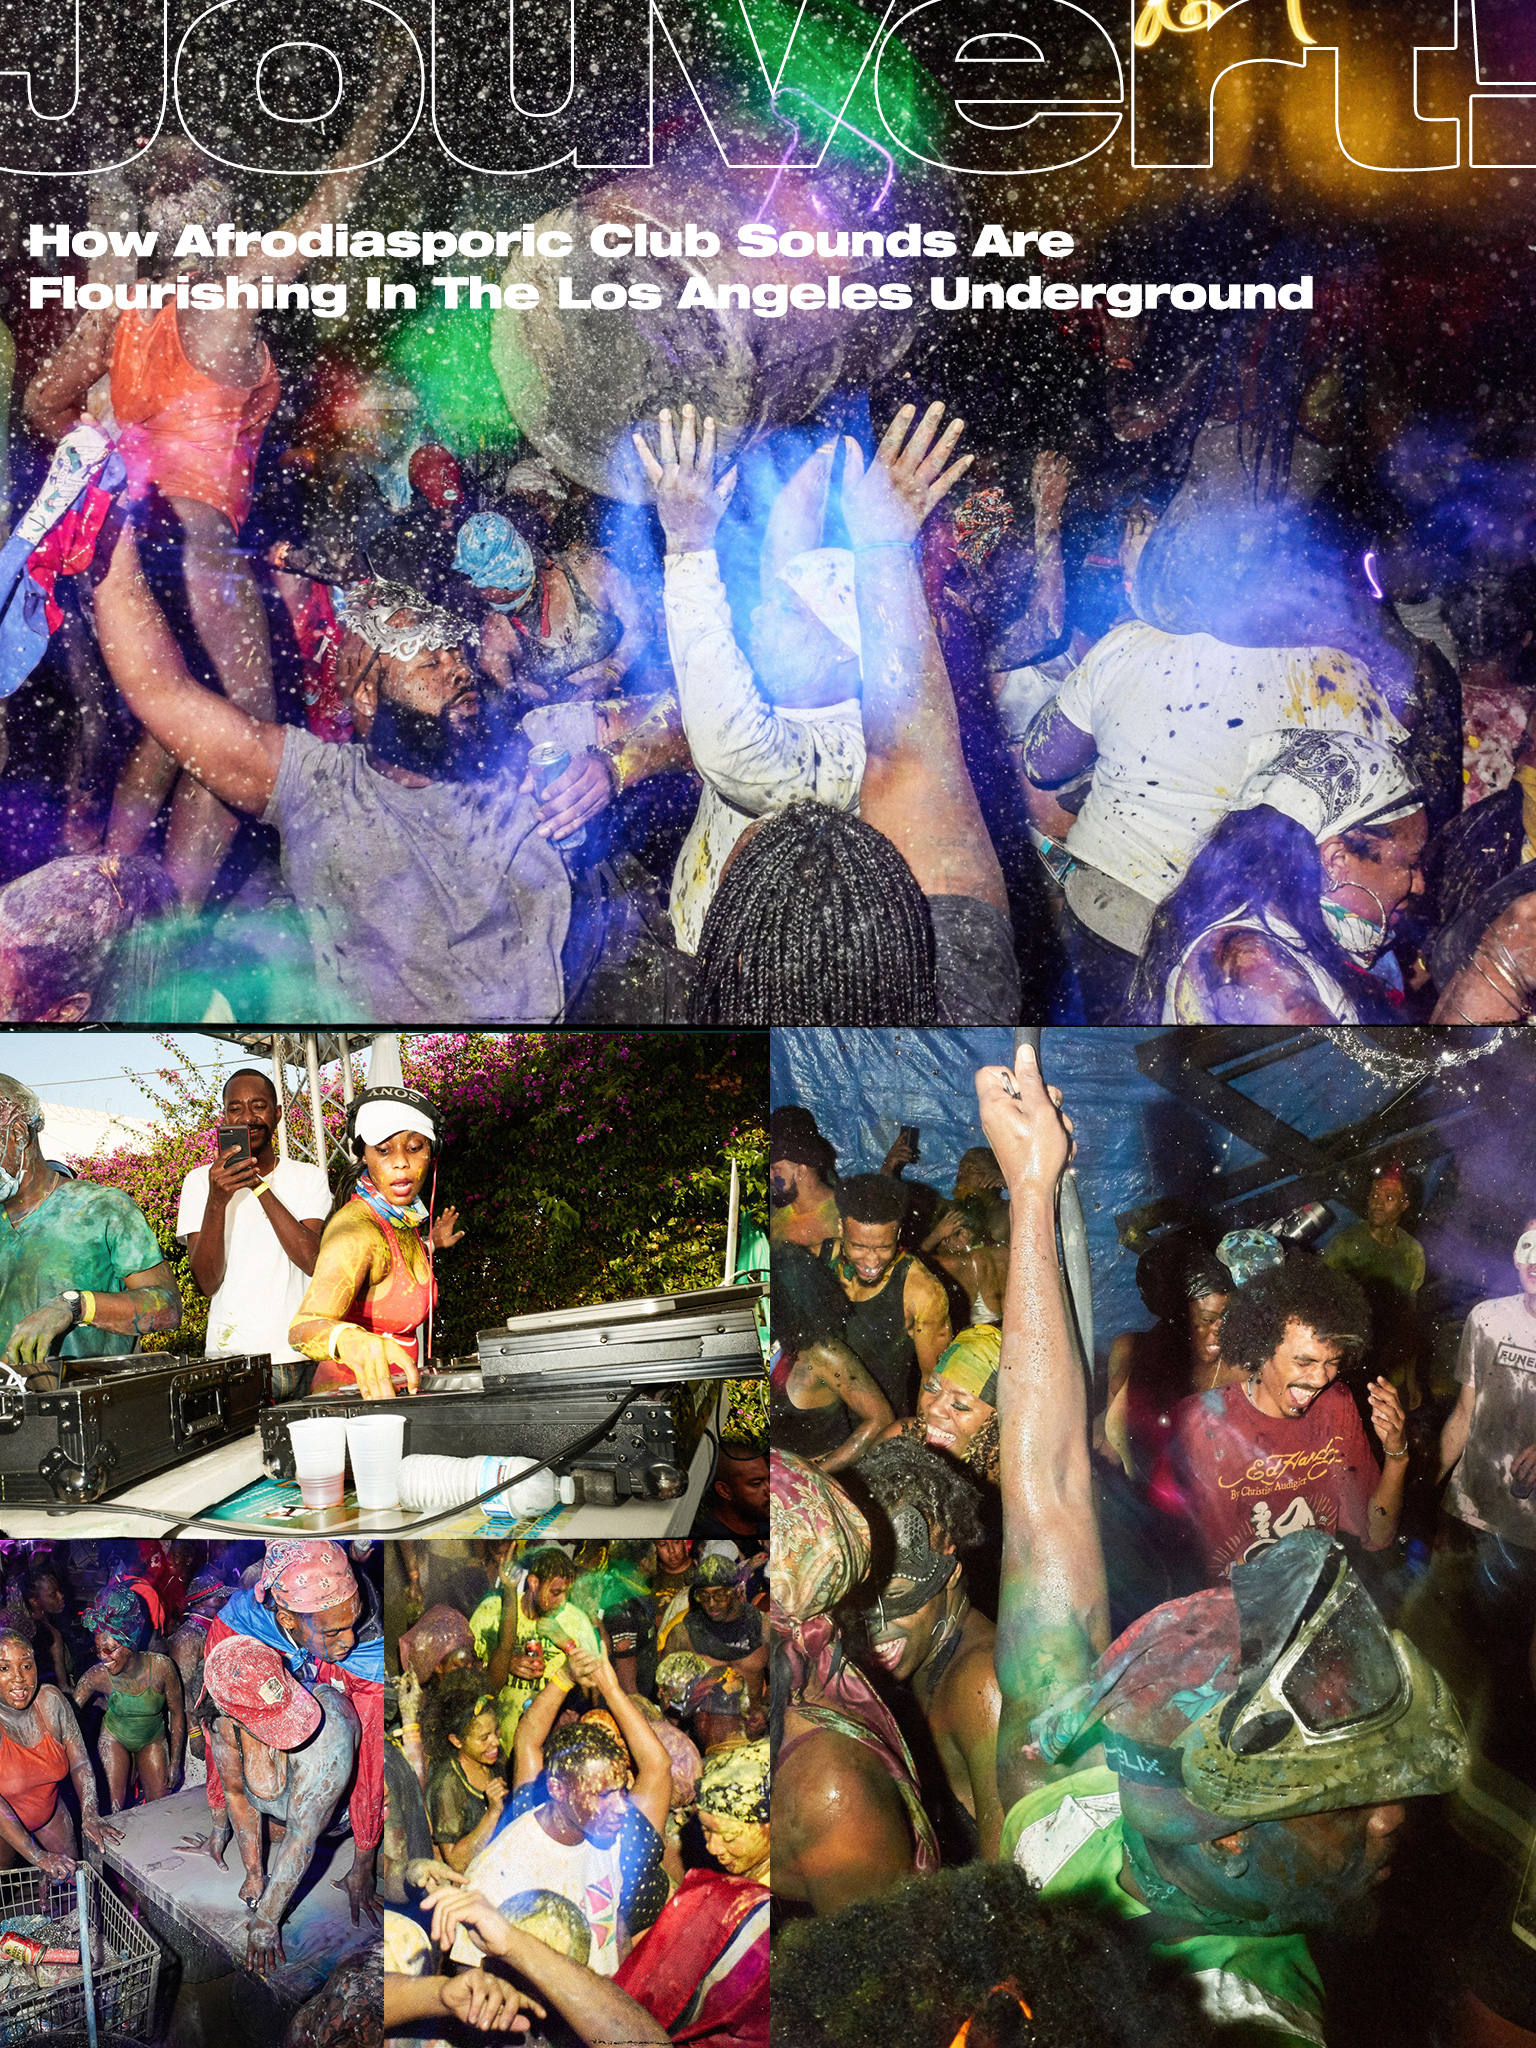 Jouvert! How Afrodiasporic Club Sounds Are Flourishing In The Los Angeles Underground